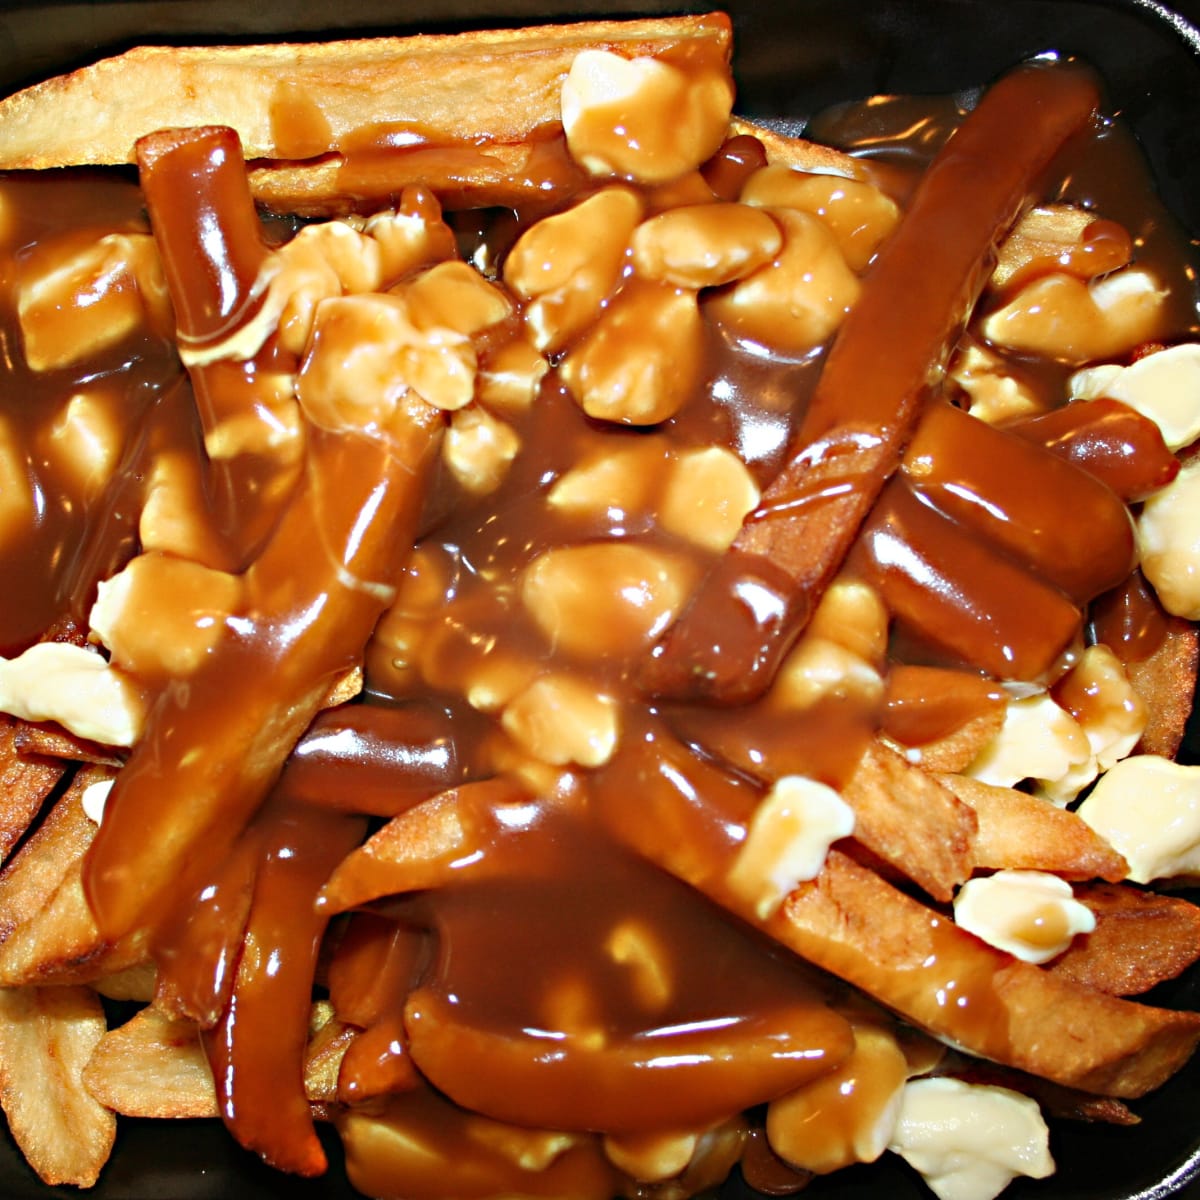 Poutine Canada - The national dish in Canada You Need To Try